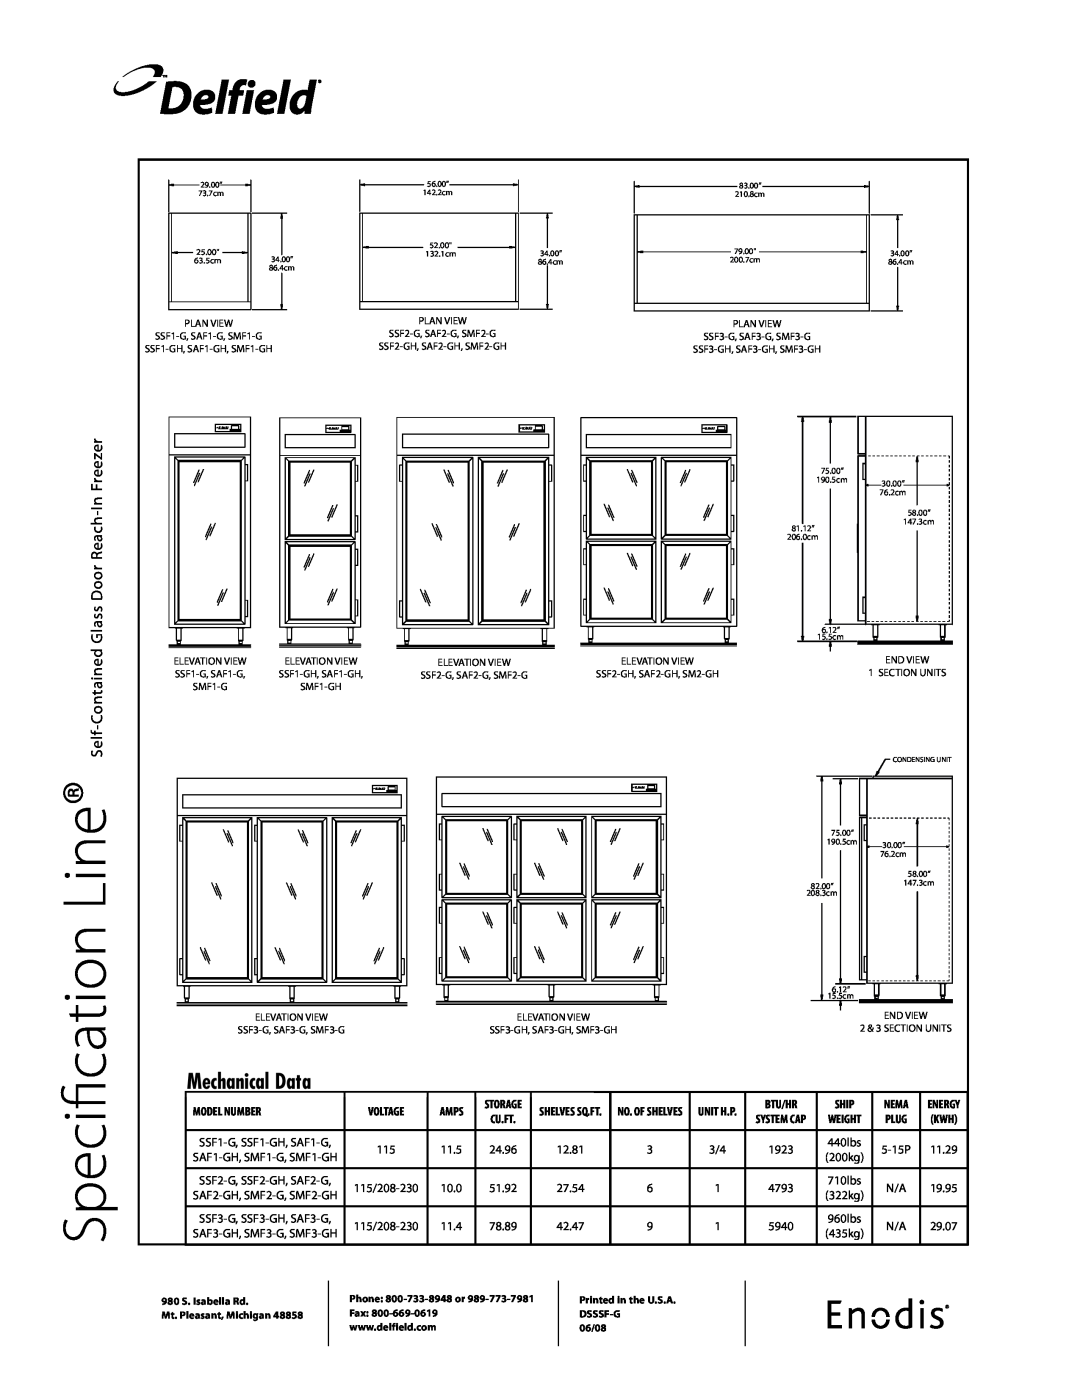 Delfield SSF-G Specification, Line, Delfield, Mechanical Data, Freezer, Self-Contained, Door Reach, Glass, Amps, Ship 